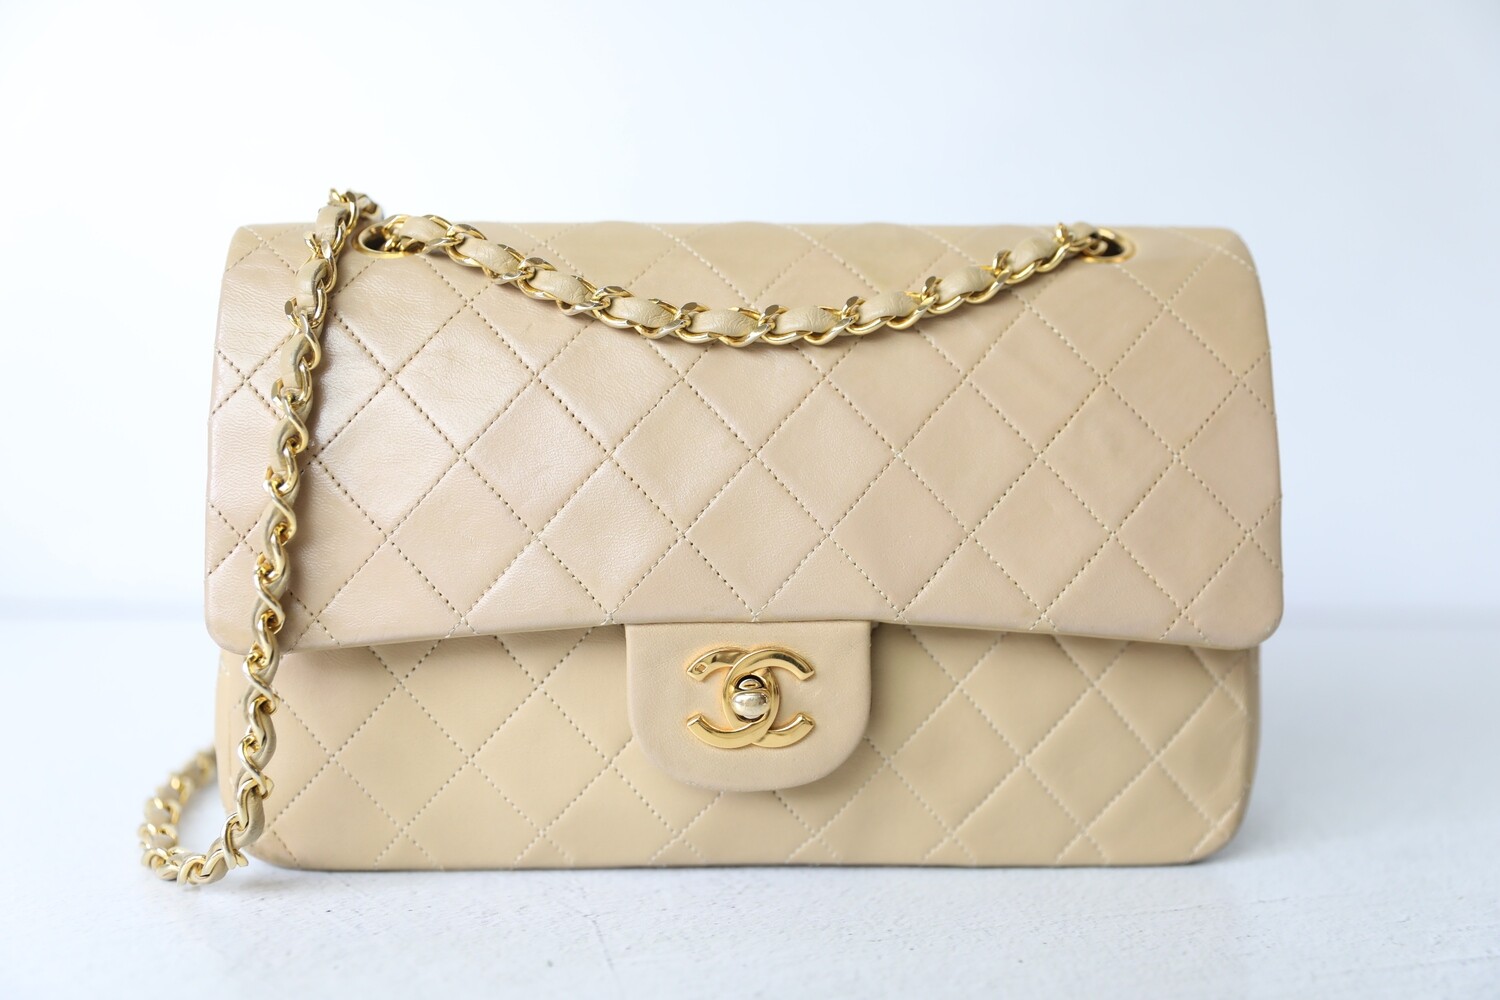 Chanel Vintage Beige, Lambskin, Quilted Classic, Medium, Gold Hardware, Preowned No Dustbag WA001